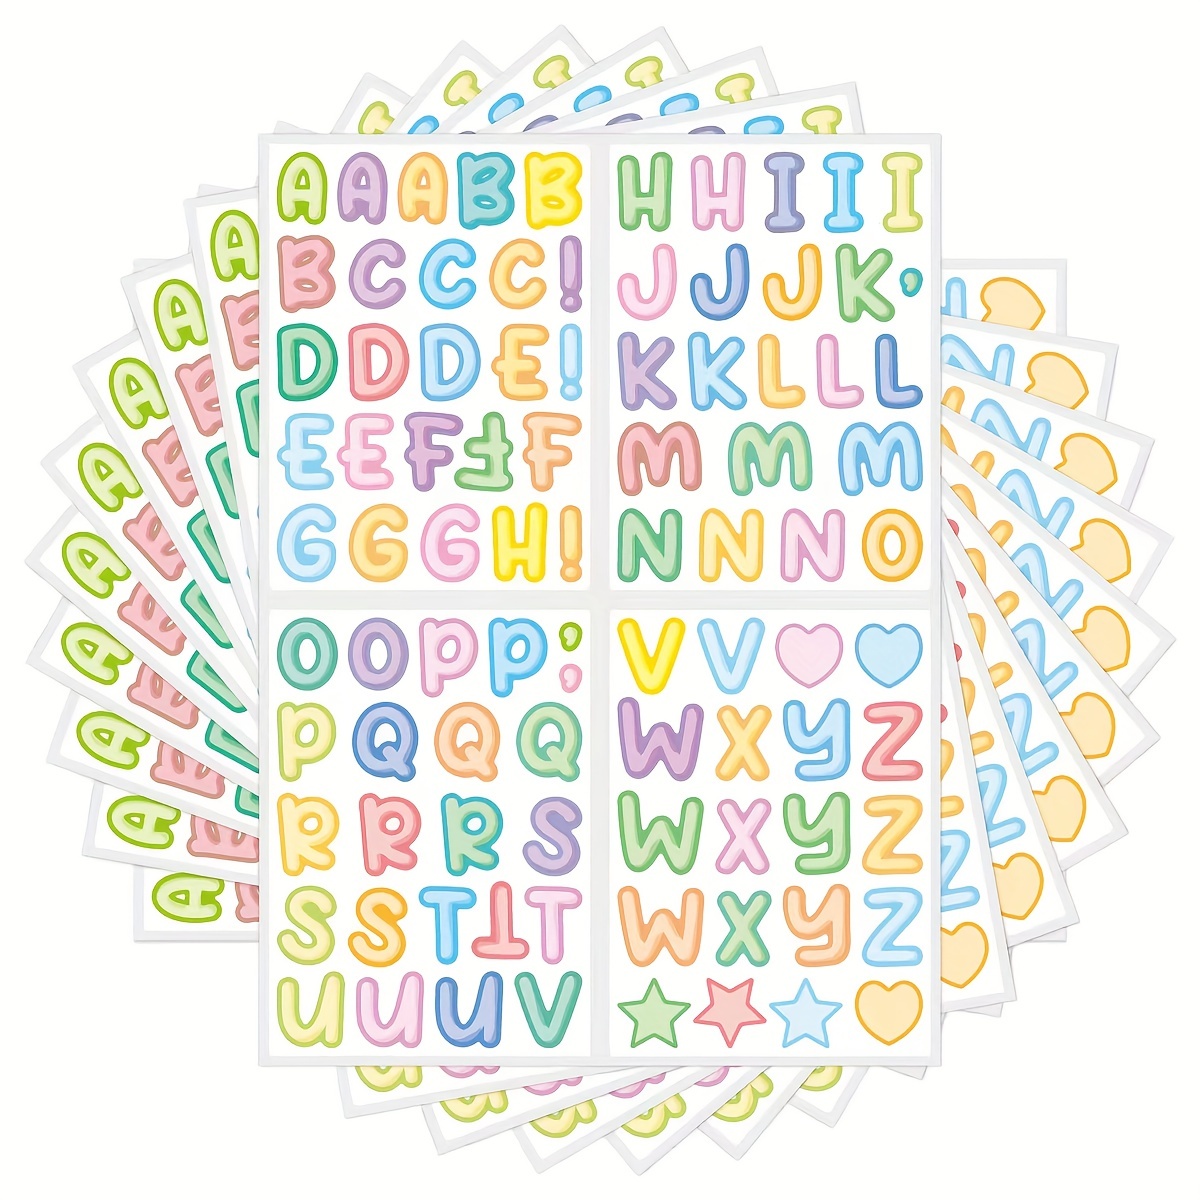  100PCS Alphabet Lore Stickers for Kids. Suitable for Children's  Enlightenment Education,Water Bottle Stickers Waterproof Vinyl Phone  Skateboard Laptop Stickers, Funny Fridge Stickers : Toys & Games